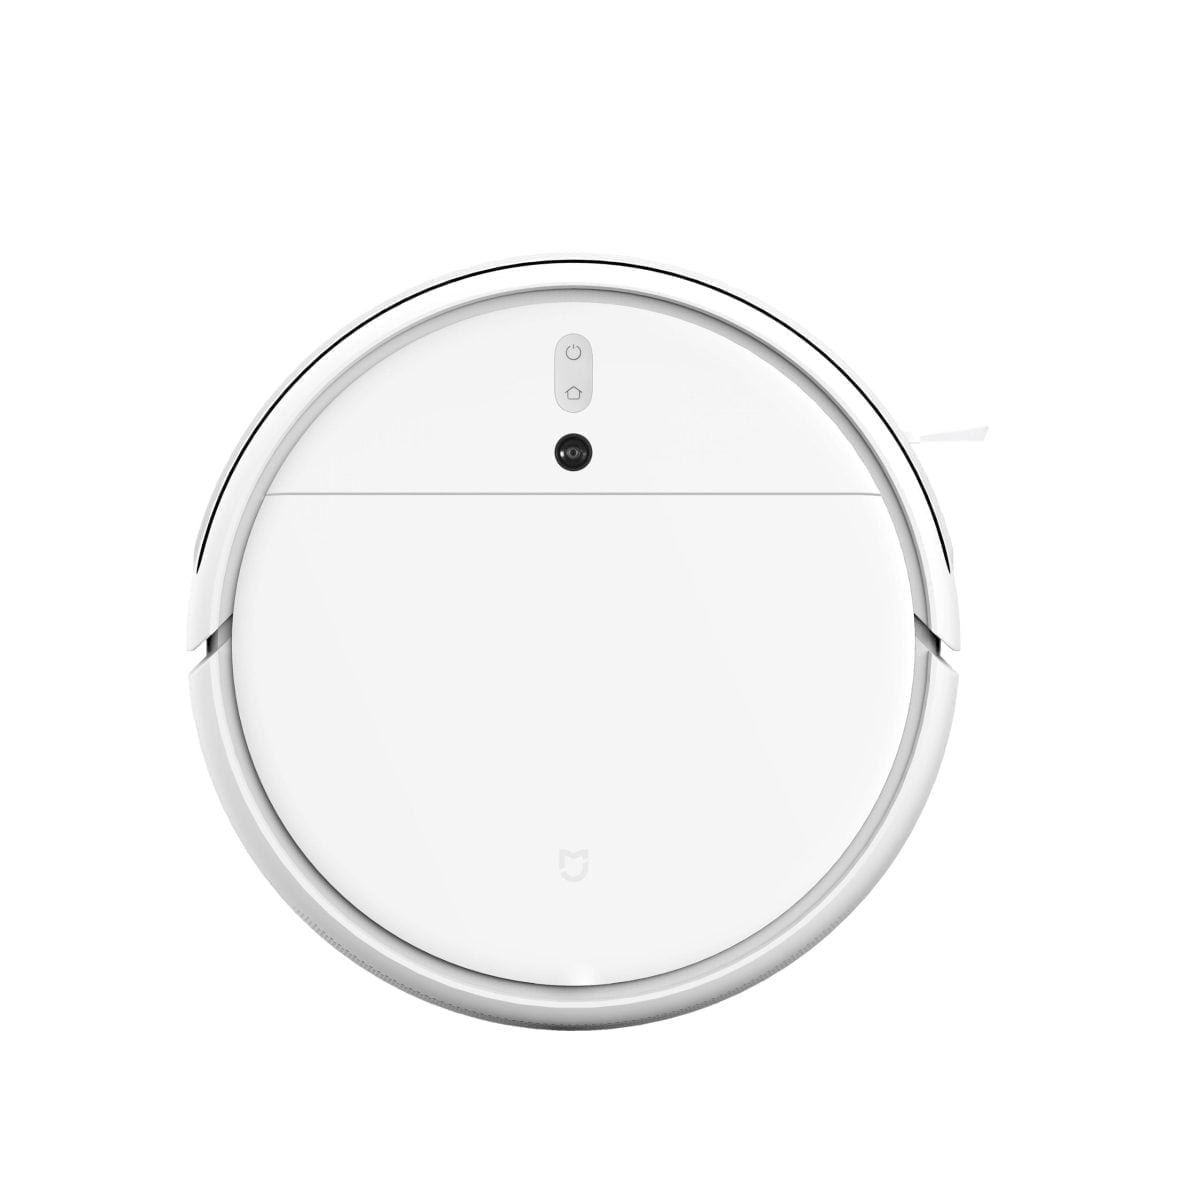 175597873 Origpic A7Fa89 Scaled Xiaomi &Lt;Div Id=&Quot;Product-Description-Short-979&Quot; Class=&Quot;Product-Description-Short&Quot;&Gt; Unique Robotic Vacuum Cleaner For A Great Price, Wet And Dry Cleaning, Wi-Fi Connection, Vslam Route Planning, Suction Power Up To 2500 Pa, Application Control, Hepa Filter And Much More. Https://Youtu.be/Ychdmp-Pa7O &Lt;/Div&Gt; Xiaomi Mi Robot Vacuum-Mop Xiaomi Mi Robot Vacuum-Mop